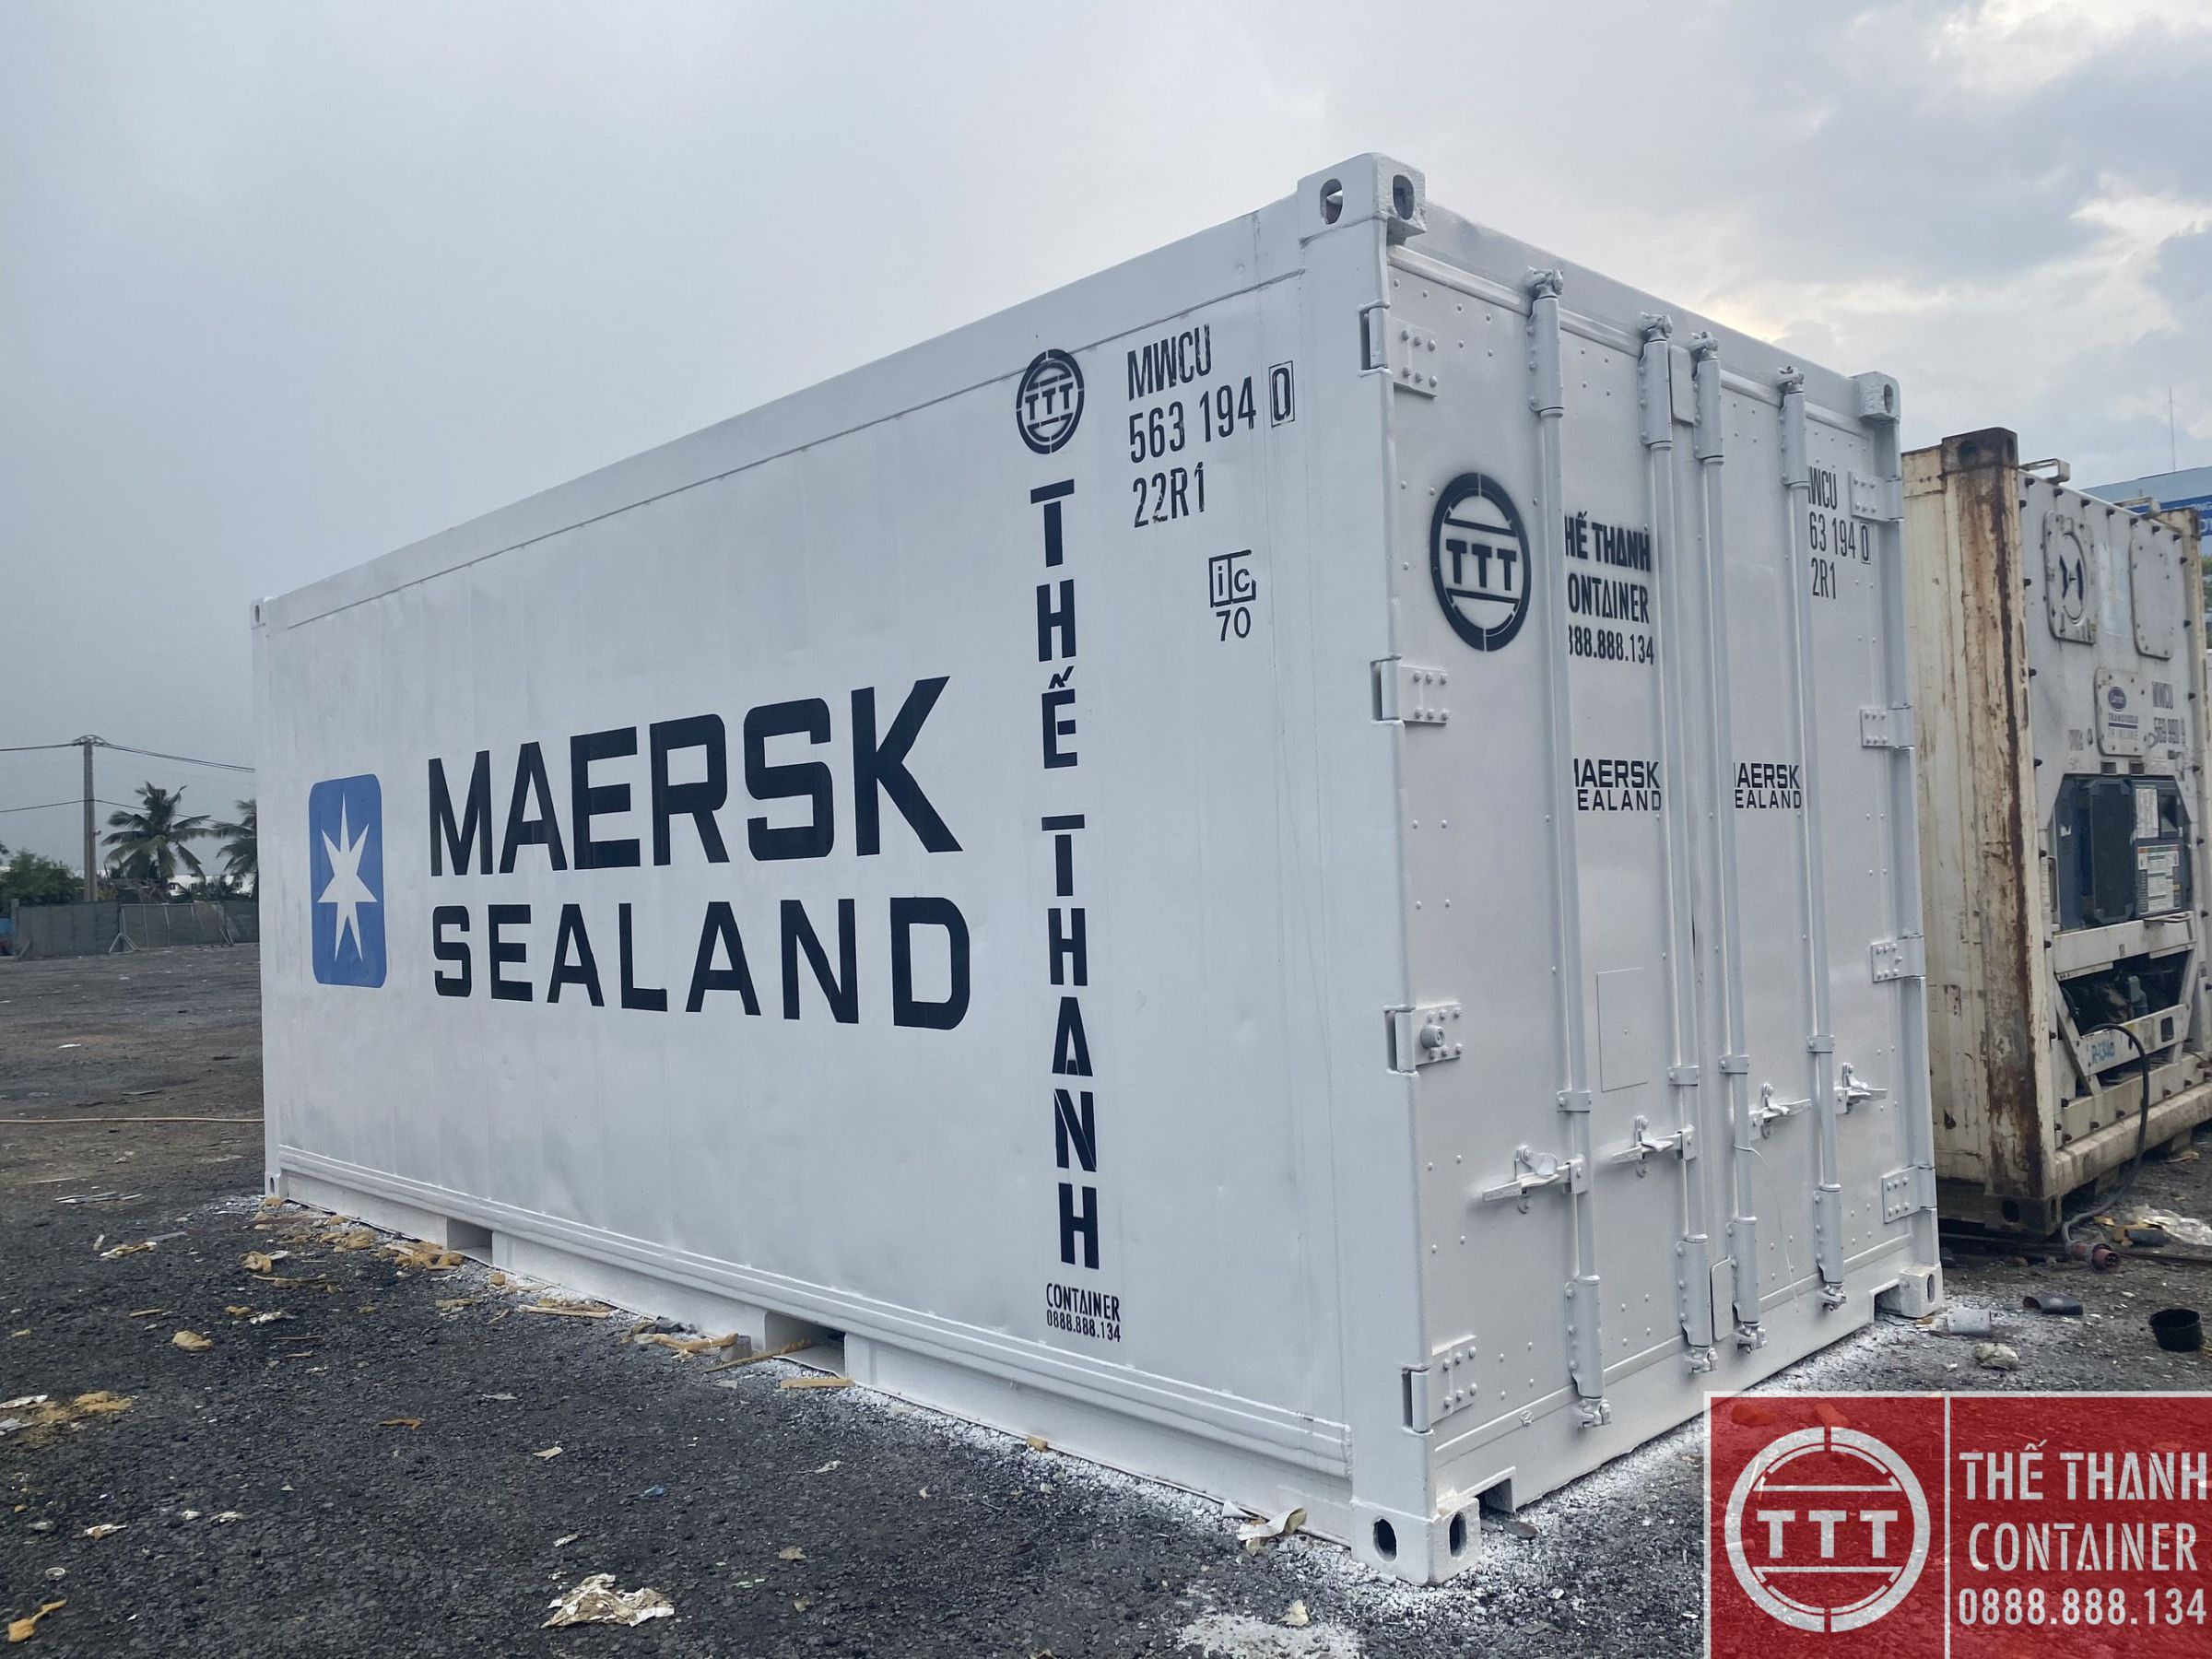 CONTAINER LẠNH 20 FEET M2